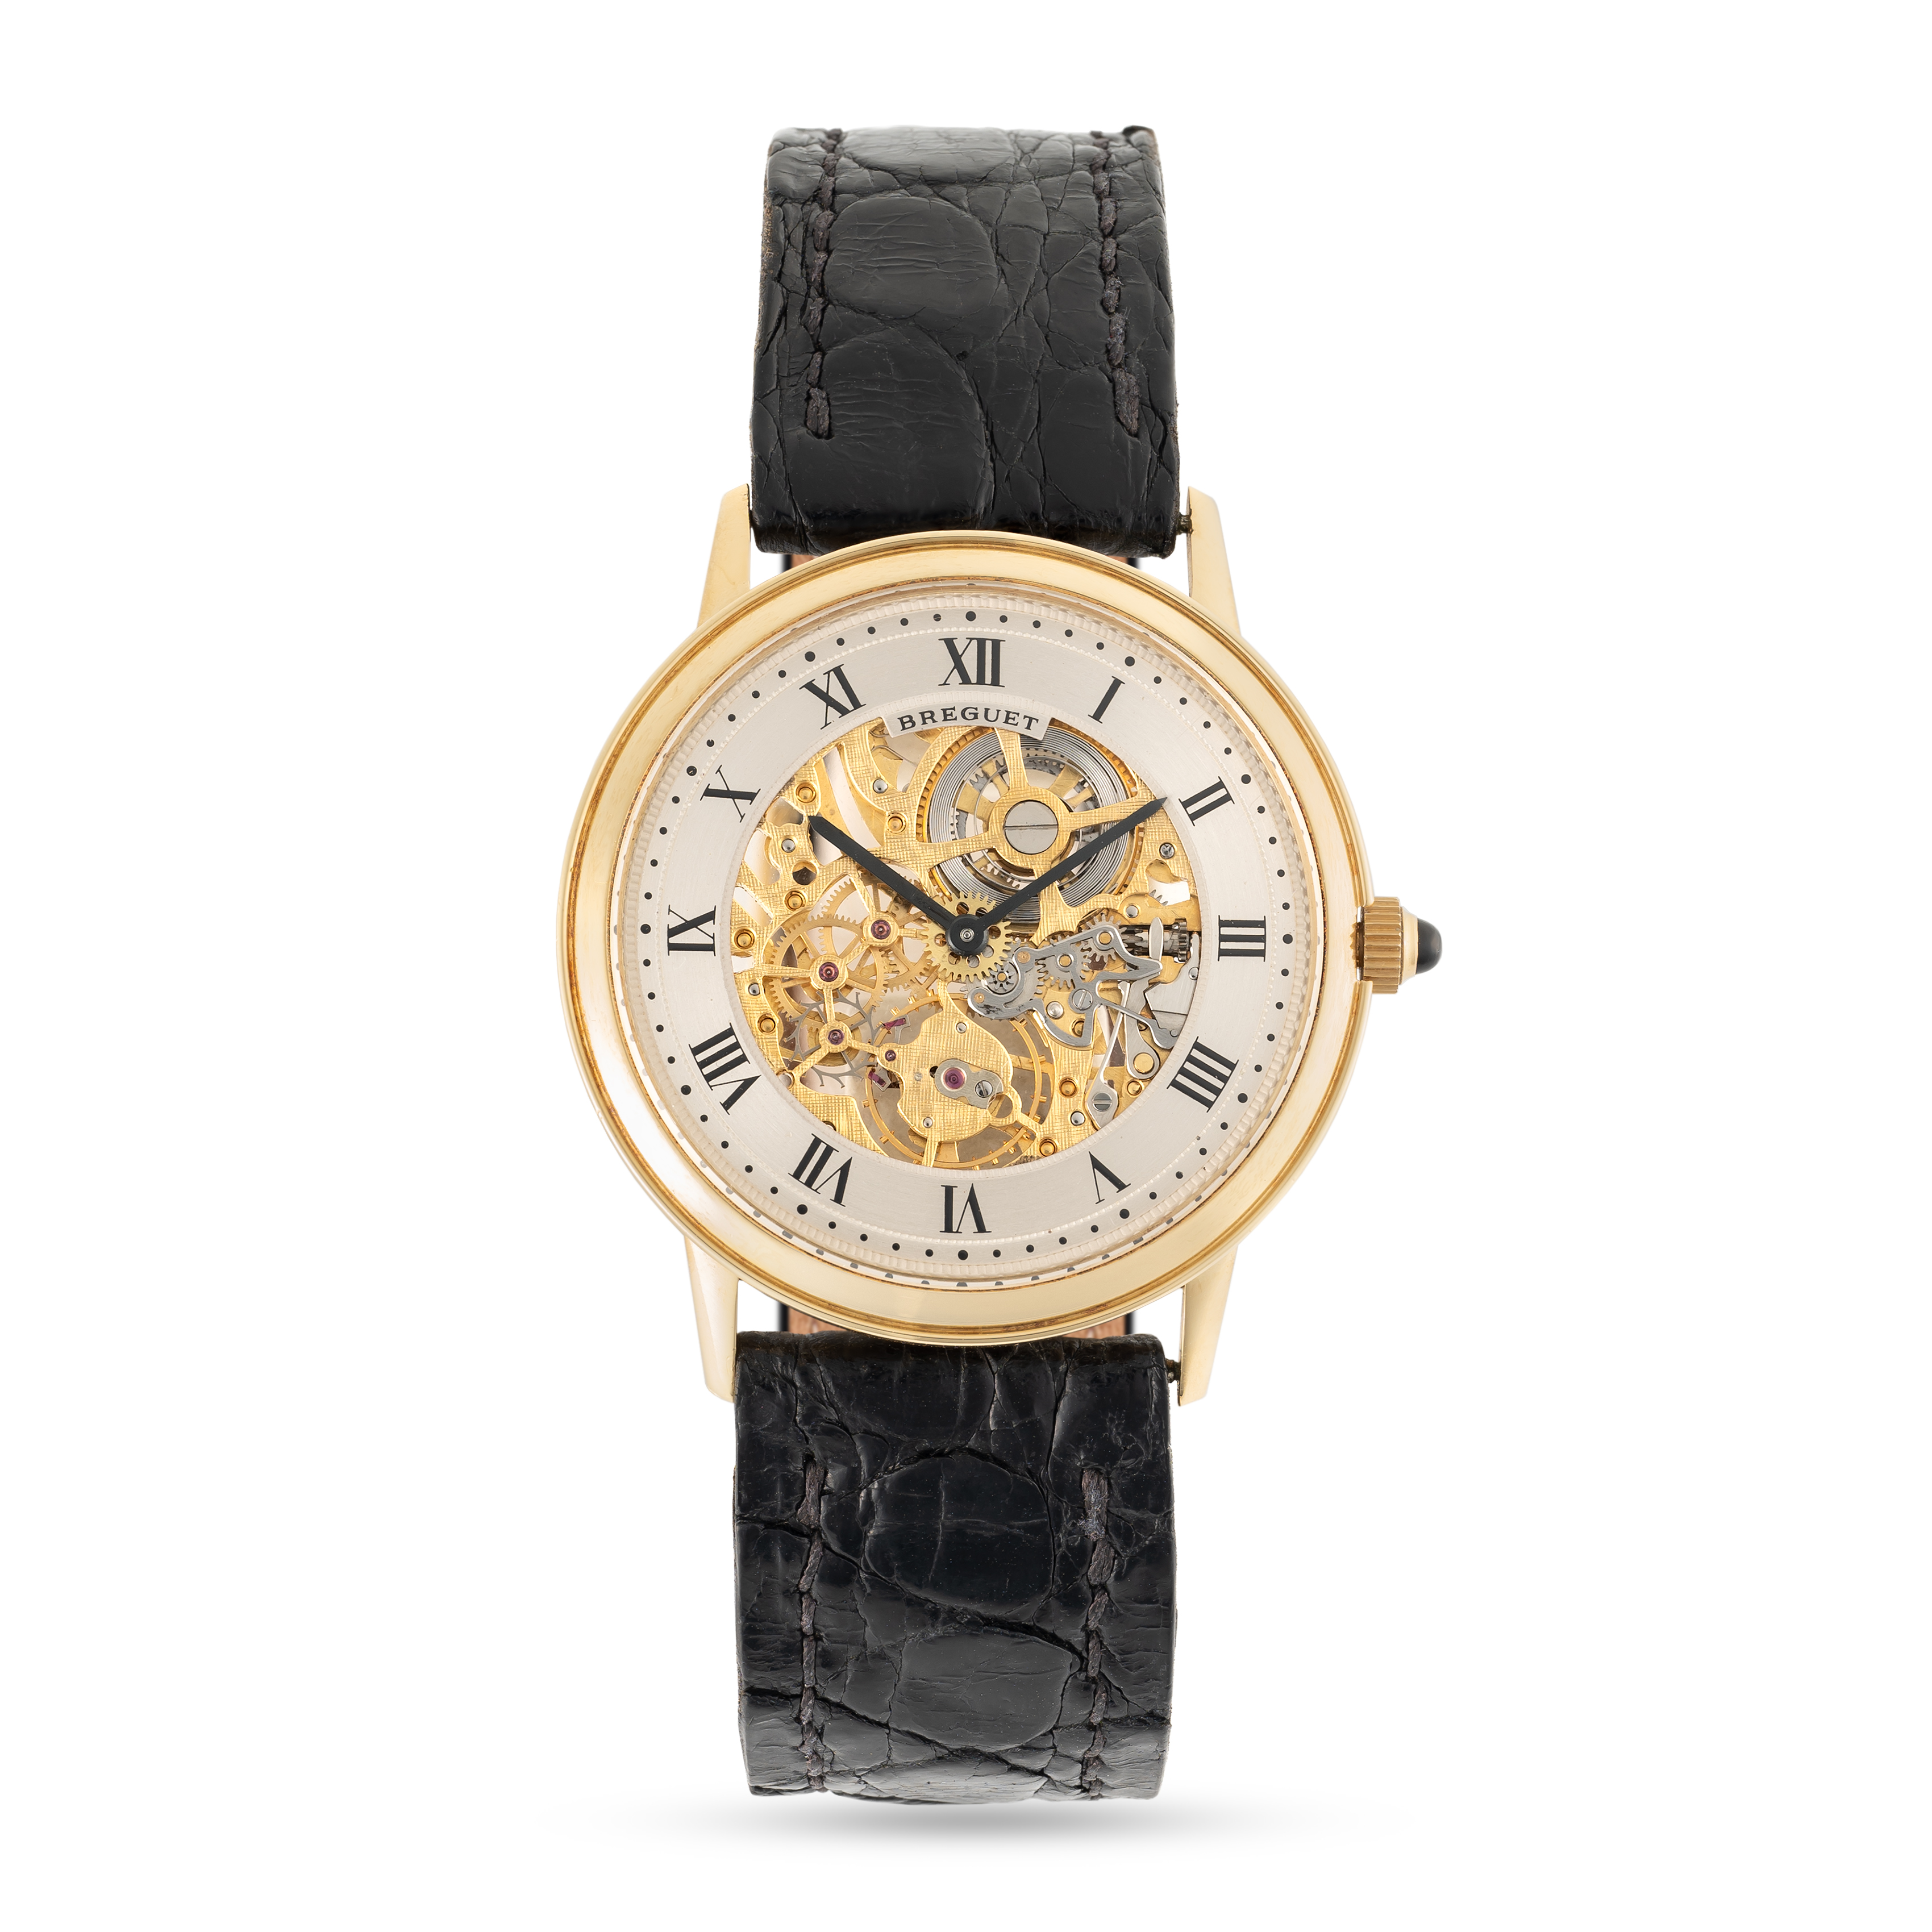 A VERY RARE GENTLEMAN'S SIZE 18K SOLID GOLD BREGUET CLASSIQUE EXTRA PLAT SKELETONISED WRIST WATCH - Image 2 of 9